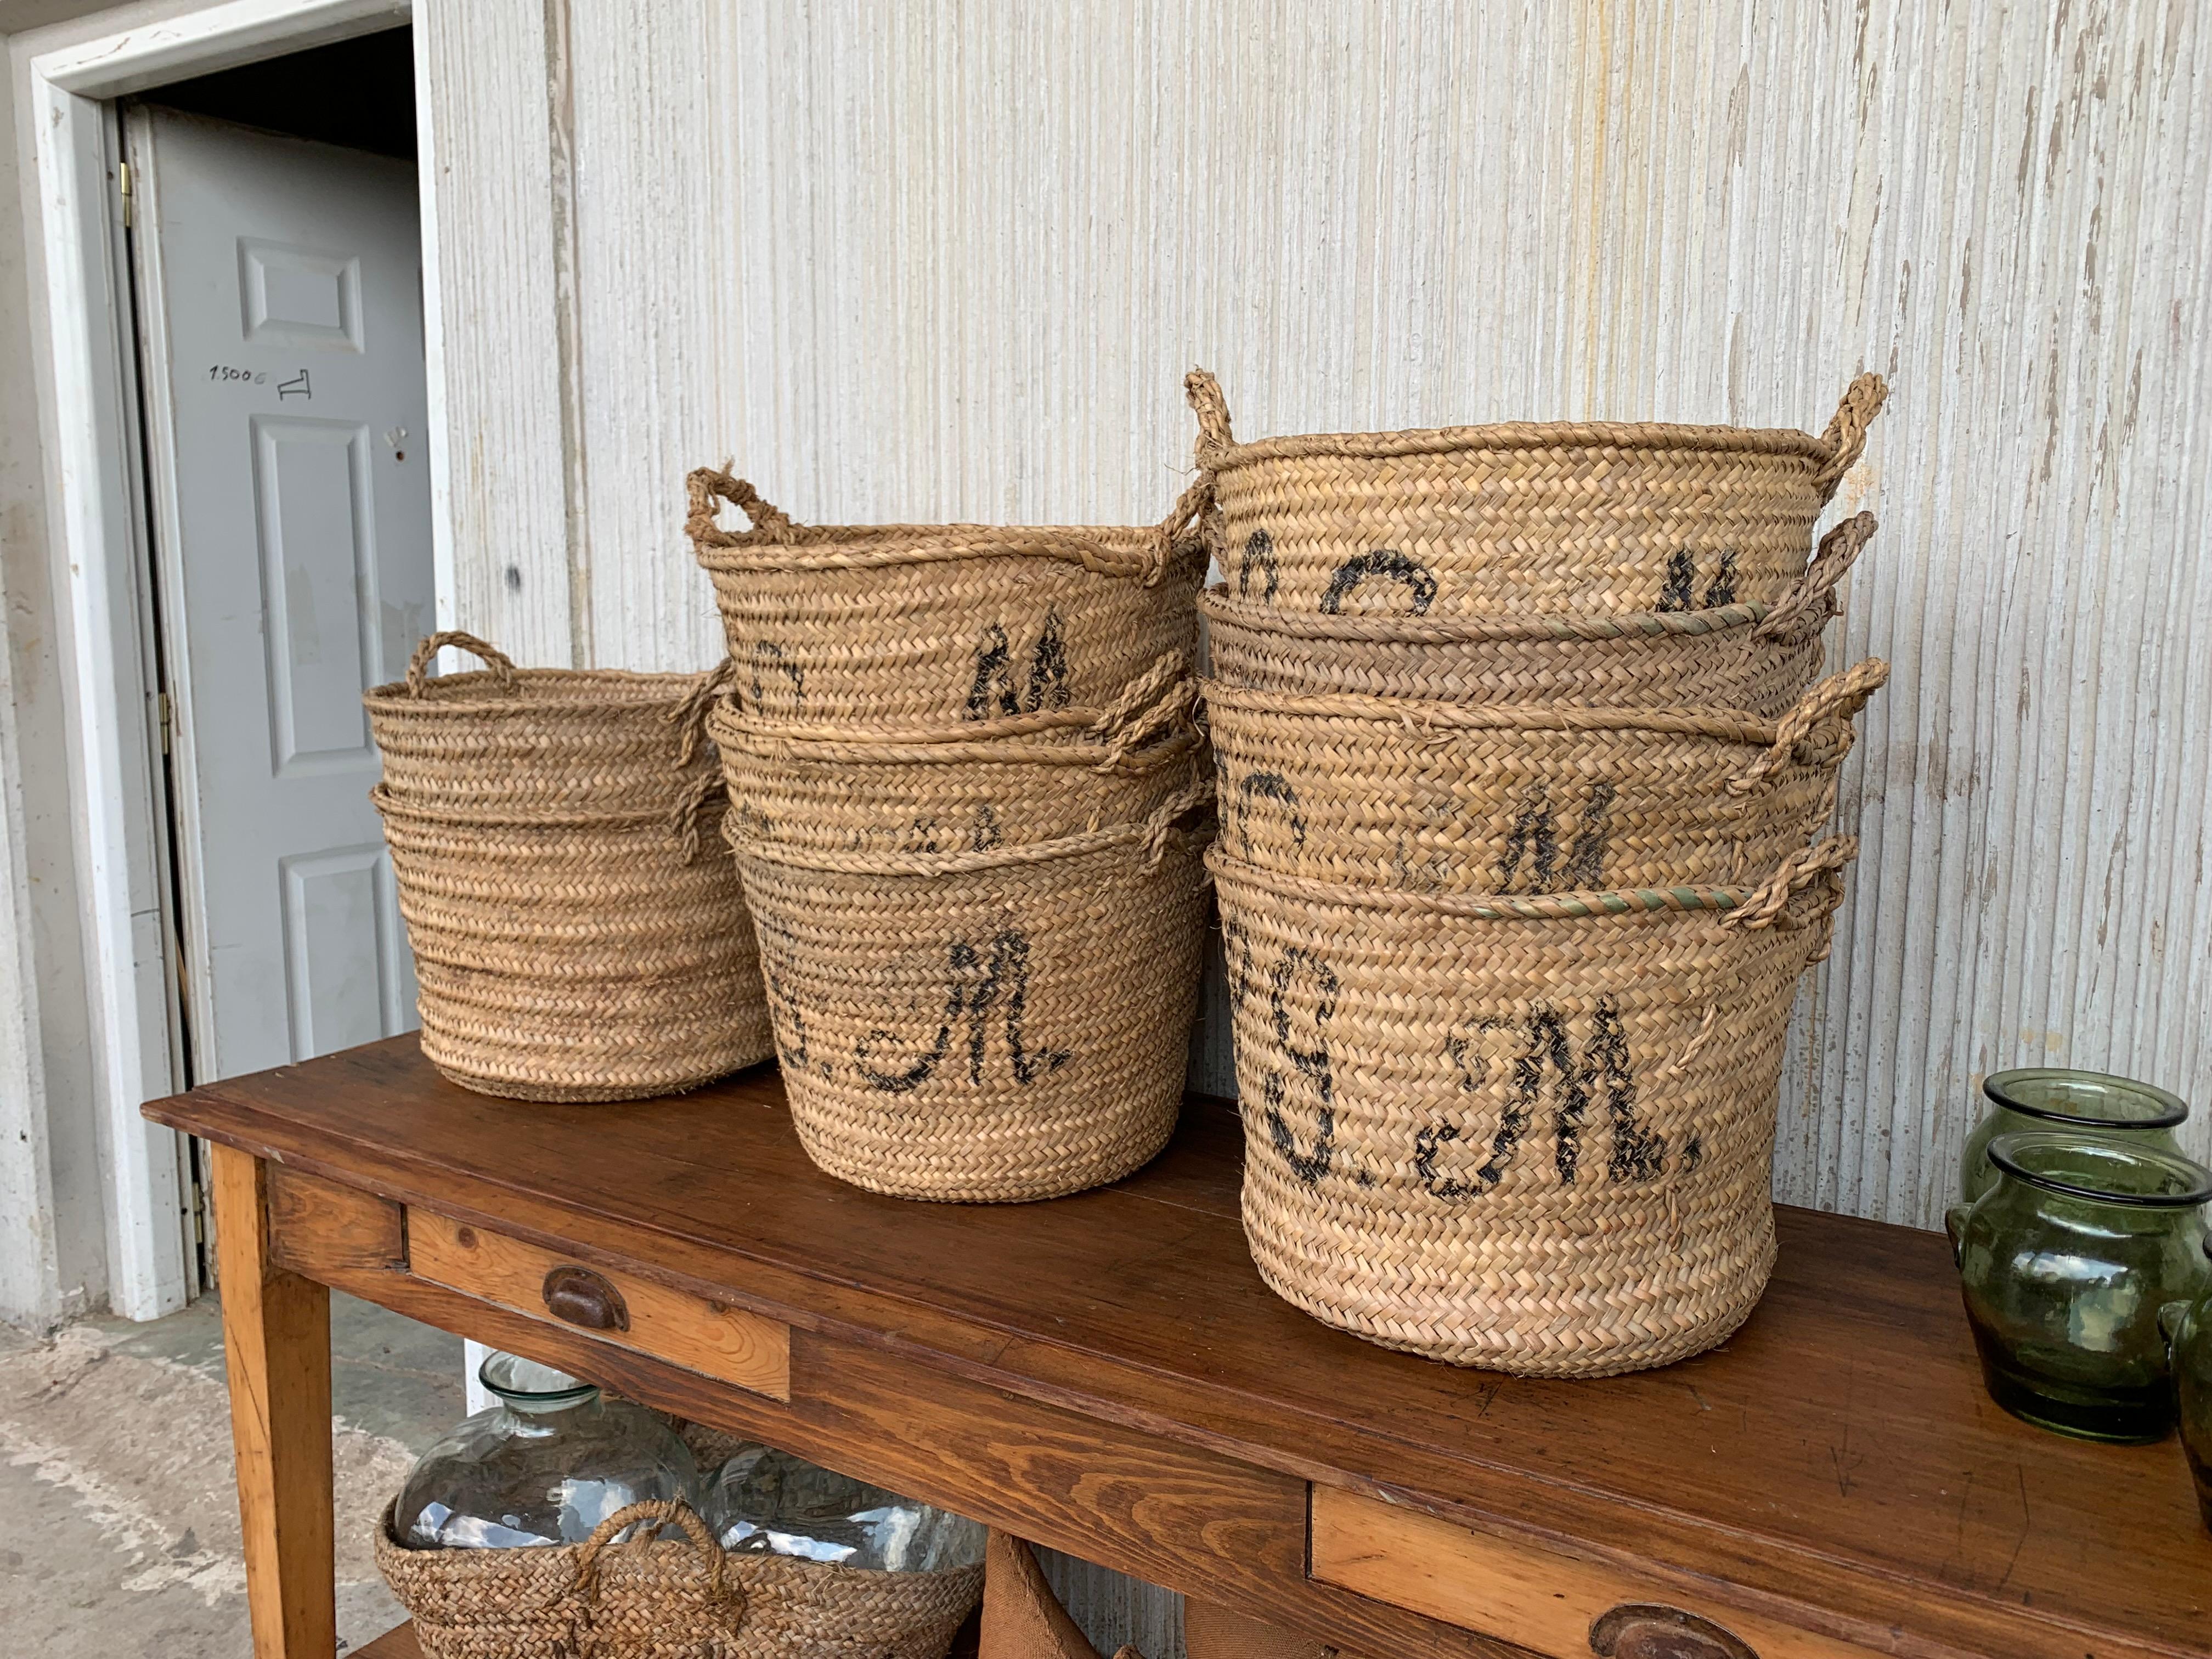 Rustic Spanish chateau champagne grape harvesting basket constructed from woven wicker reeds. Features a thick braided top with handles on each end and brightly black champagne house initials on the sides reading S.G.M in vivid black paint.